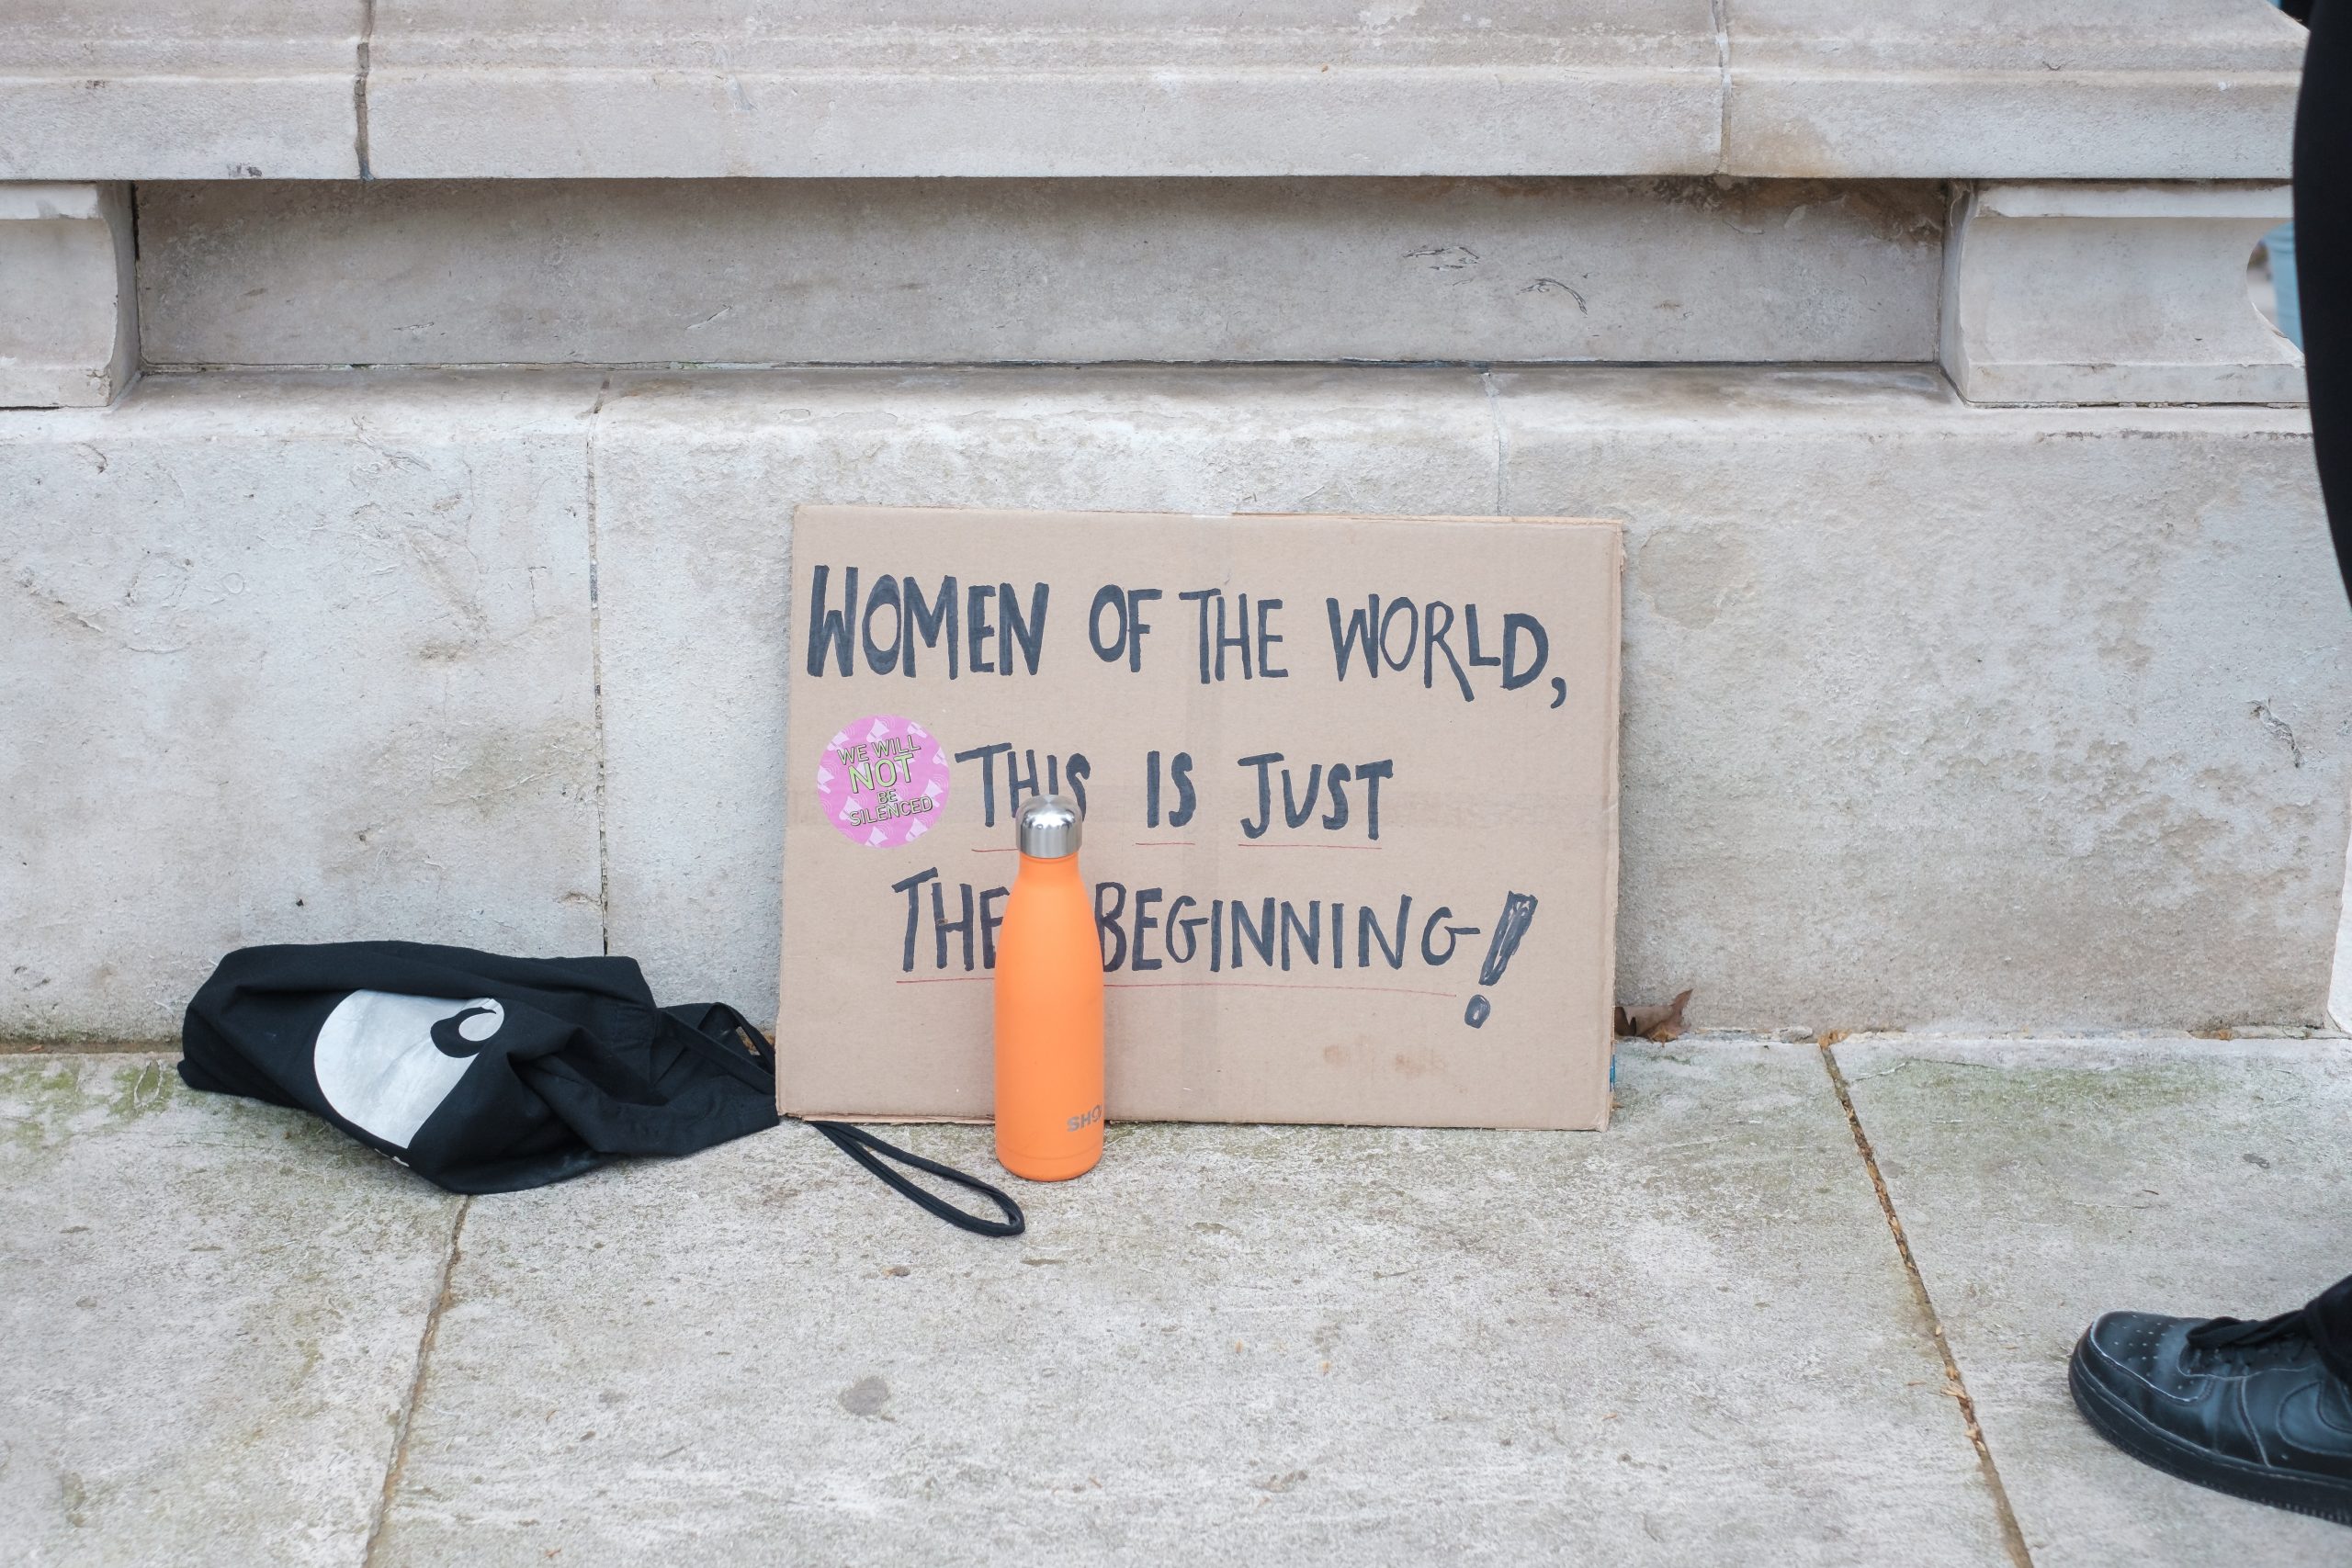 A sign leaning against a stone wall on the floor reads "women of the world, this is just the beginning"